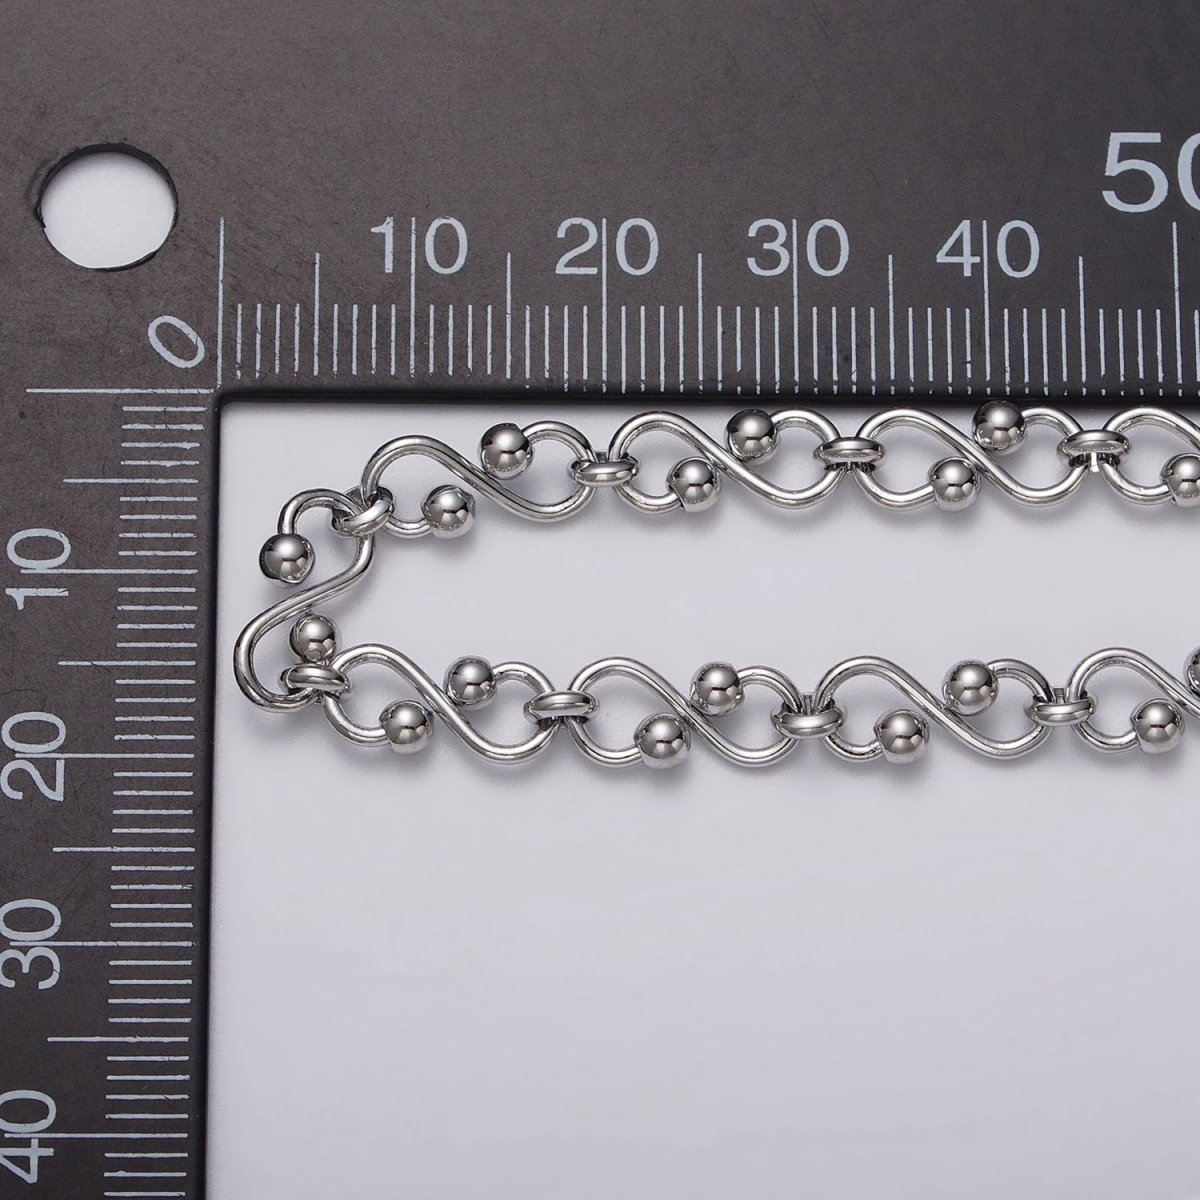 Silver Infinity Link Chain 5.3mm Unique Figure 8 Design Unfinished Chain for Jewelry Making Supply | ROLL-1197 Clearance Pricing - DLUXCA